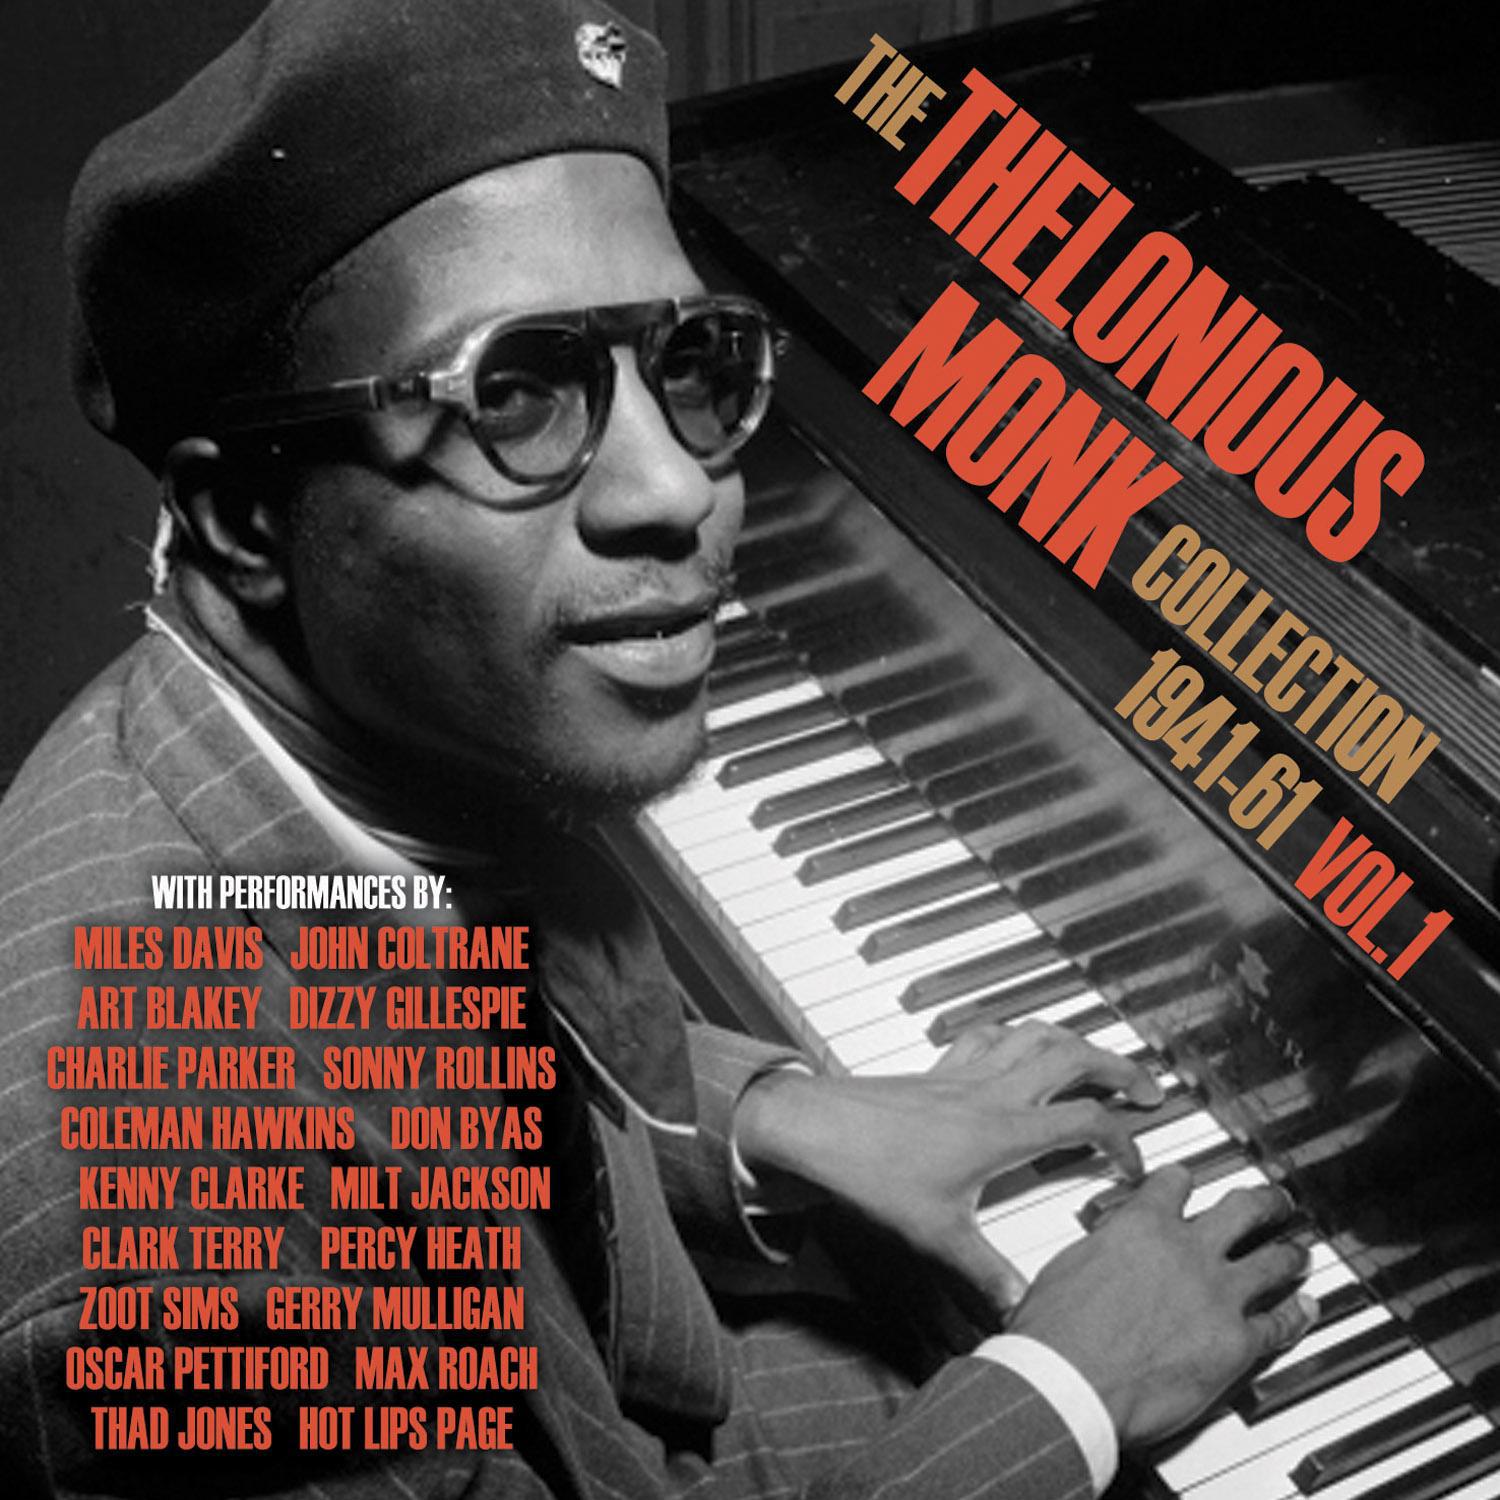 The Thelonious Monk Collection 1941-61, Vol. 1